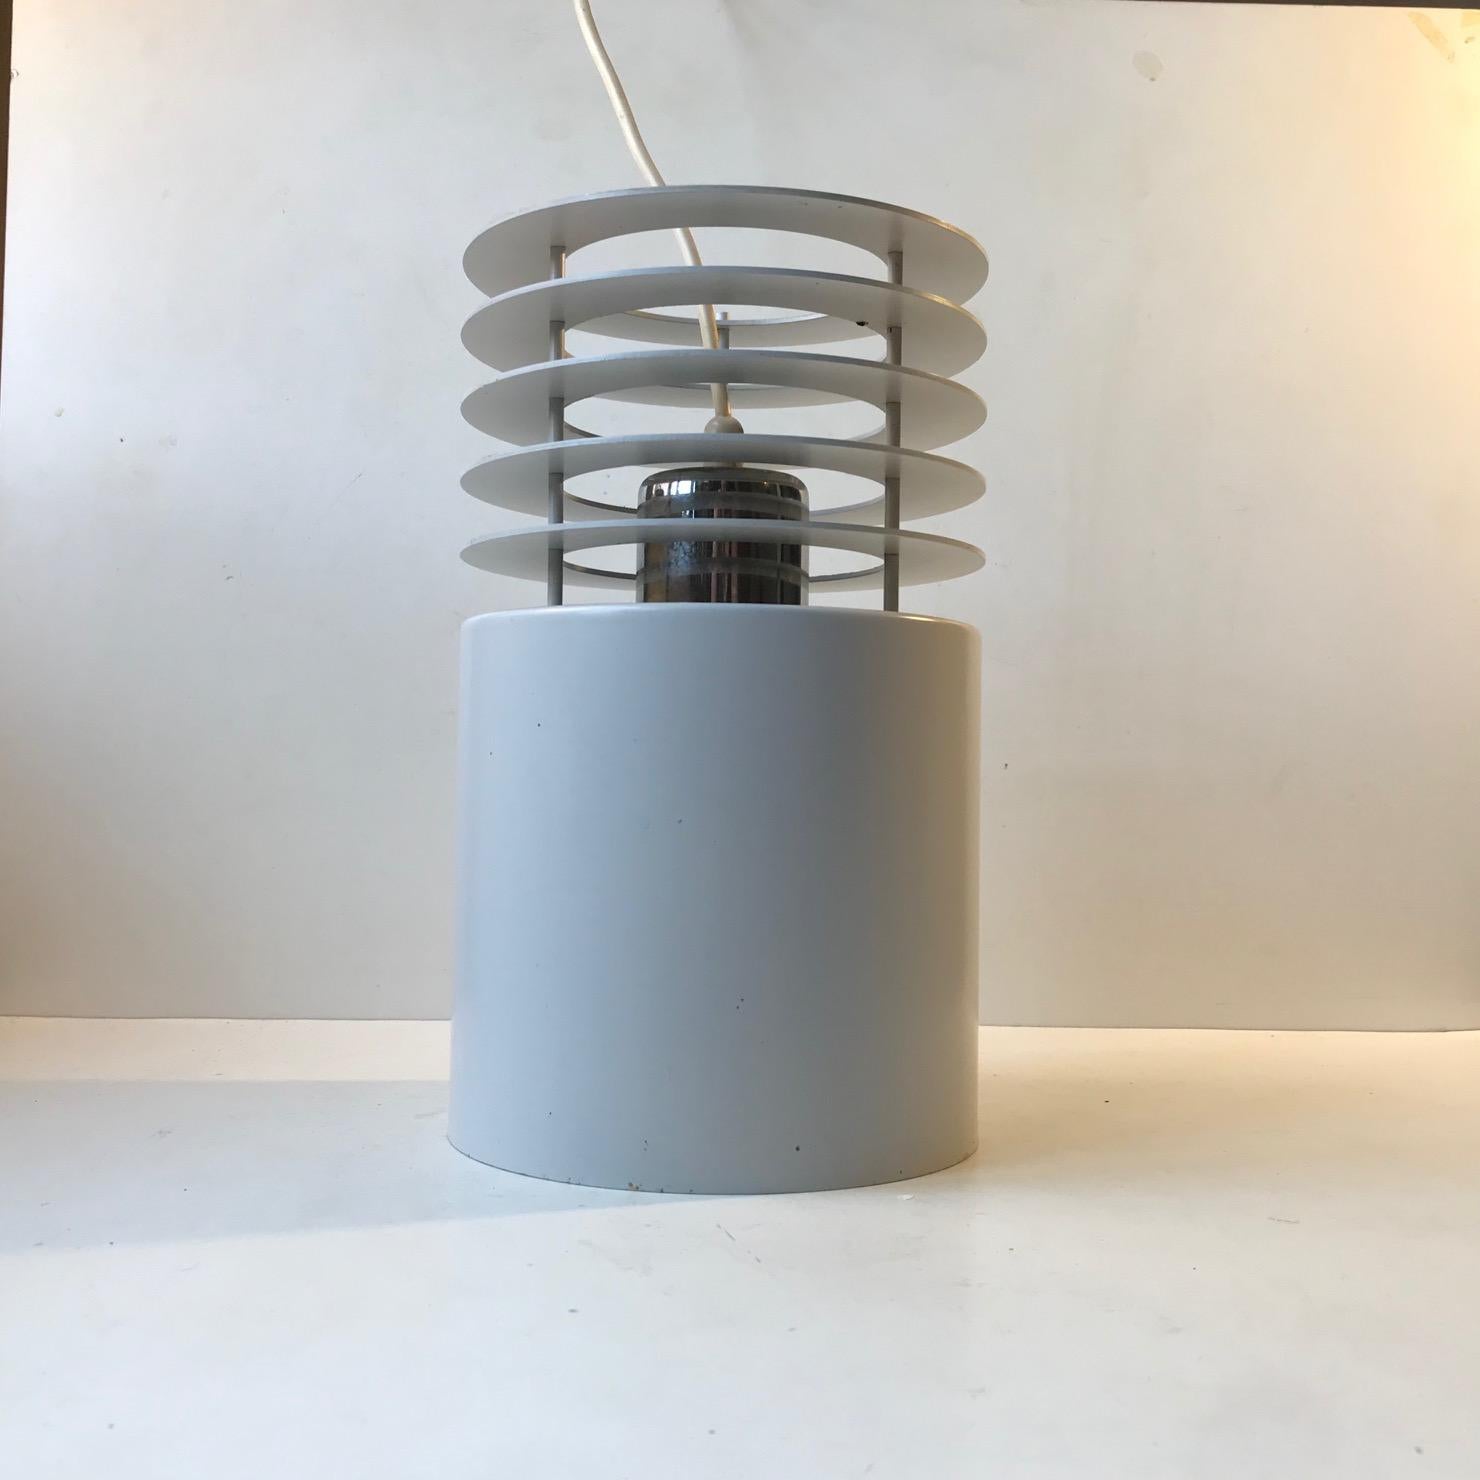 Cylindrical white tiered Hydra 1 pendant lamp designed by Jo Hammerborg and manufactured by the Danish company Fog & Mørup in the 1970s. Its made from powder coated and chromed steel. Measurements: H: 28.5 cm, D: 18 cm.
   